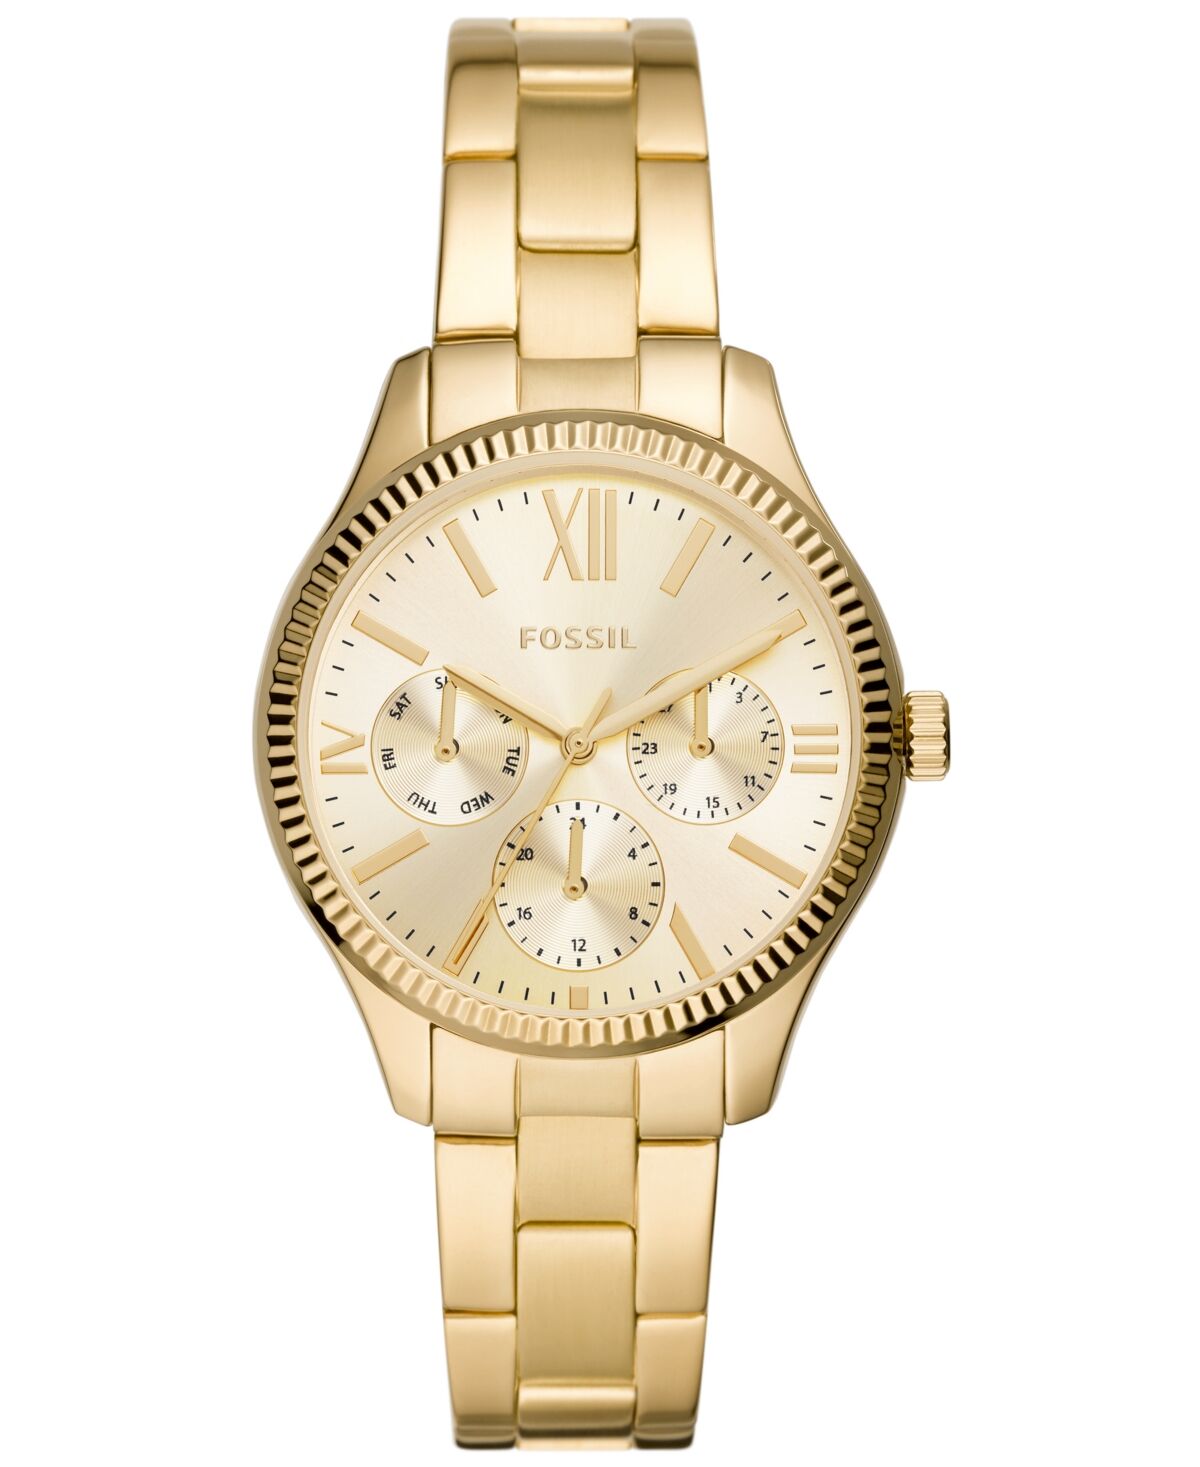 Fossil Women's Rye Multifunction Gold-Tone Stainless Steel Watch, 36mm - Gold-Tone